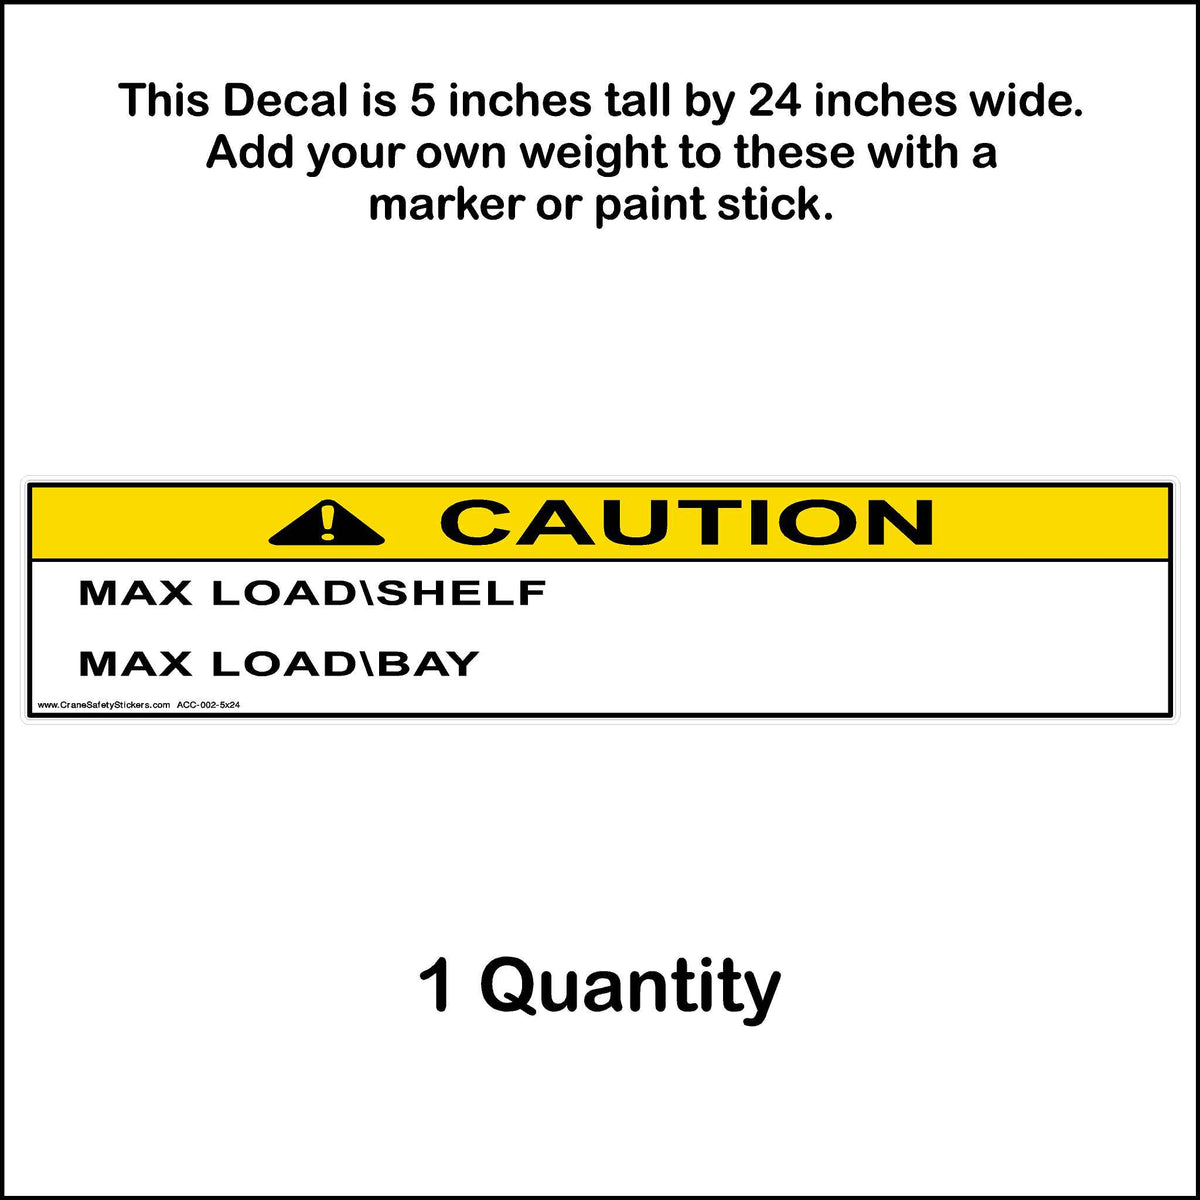 5 inches by 24 inches maximum load shelf and maximum load bay sticker.